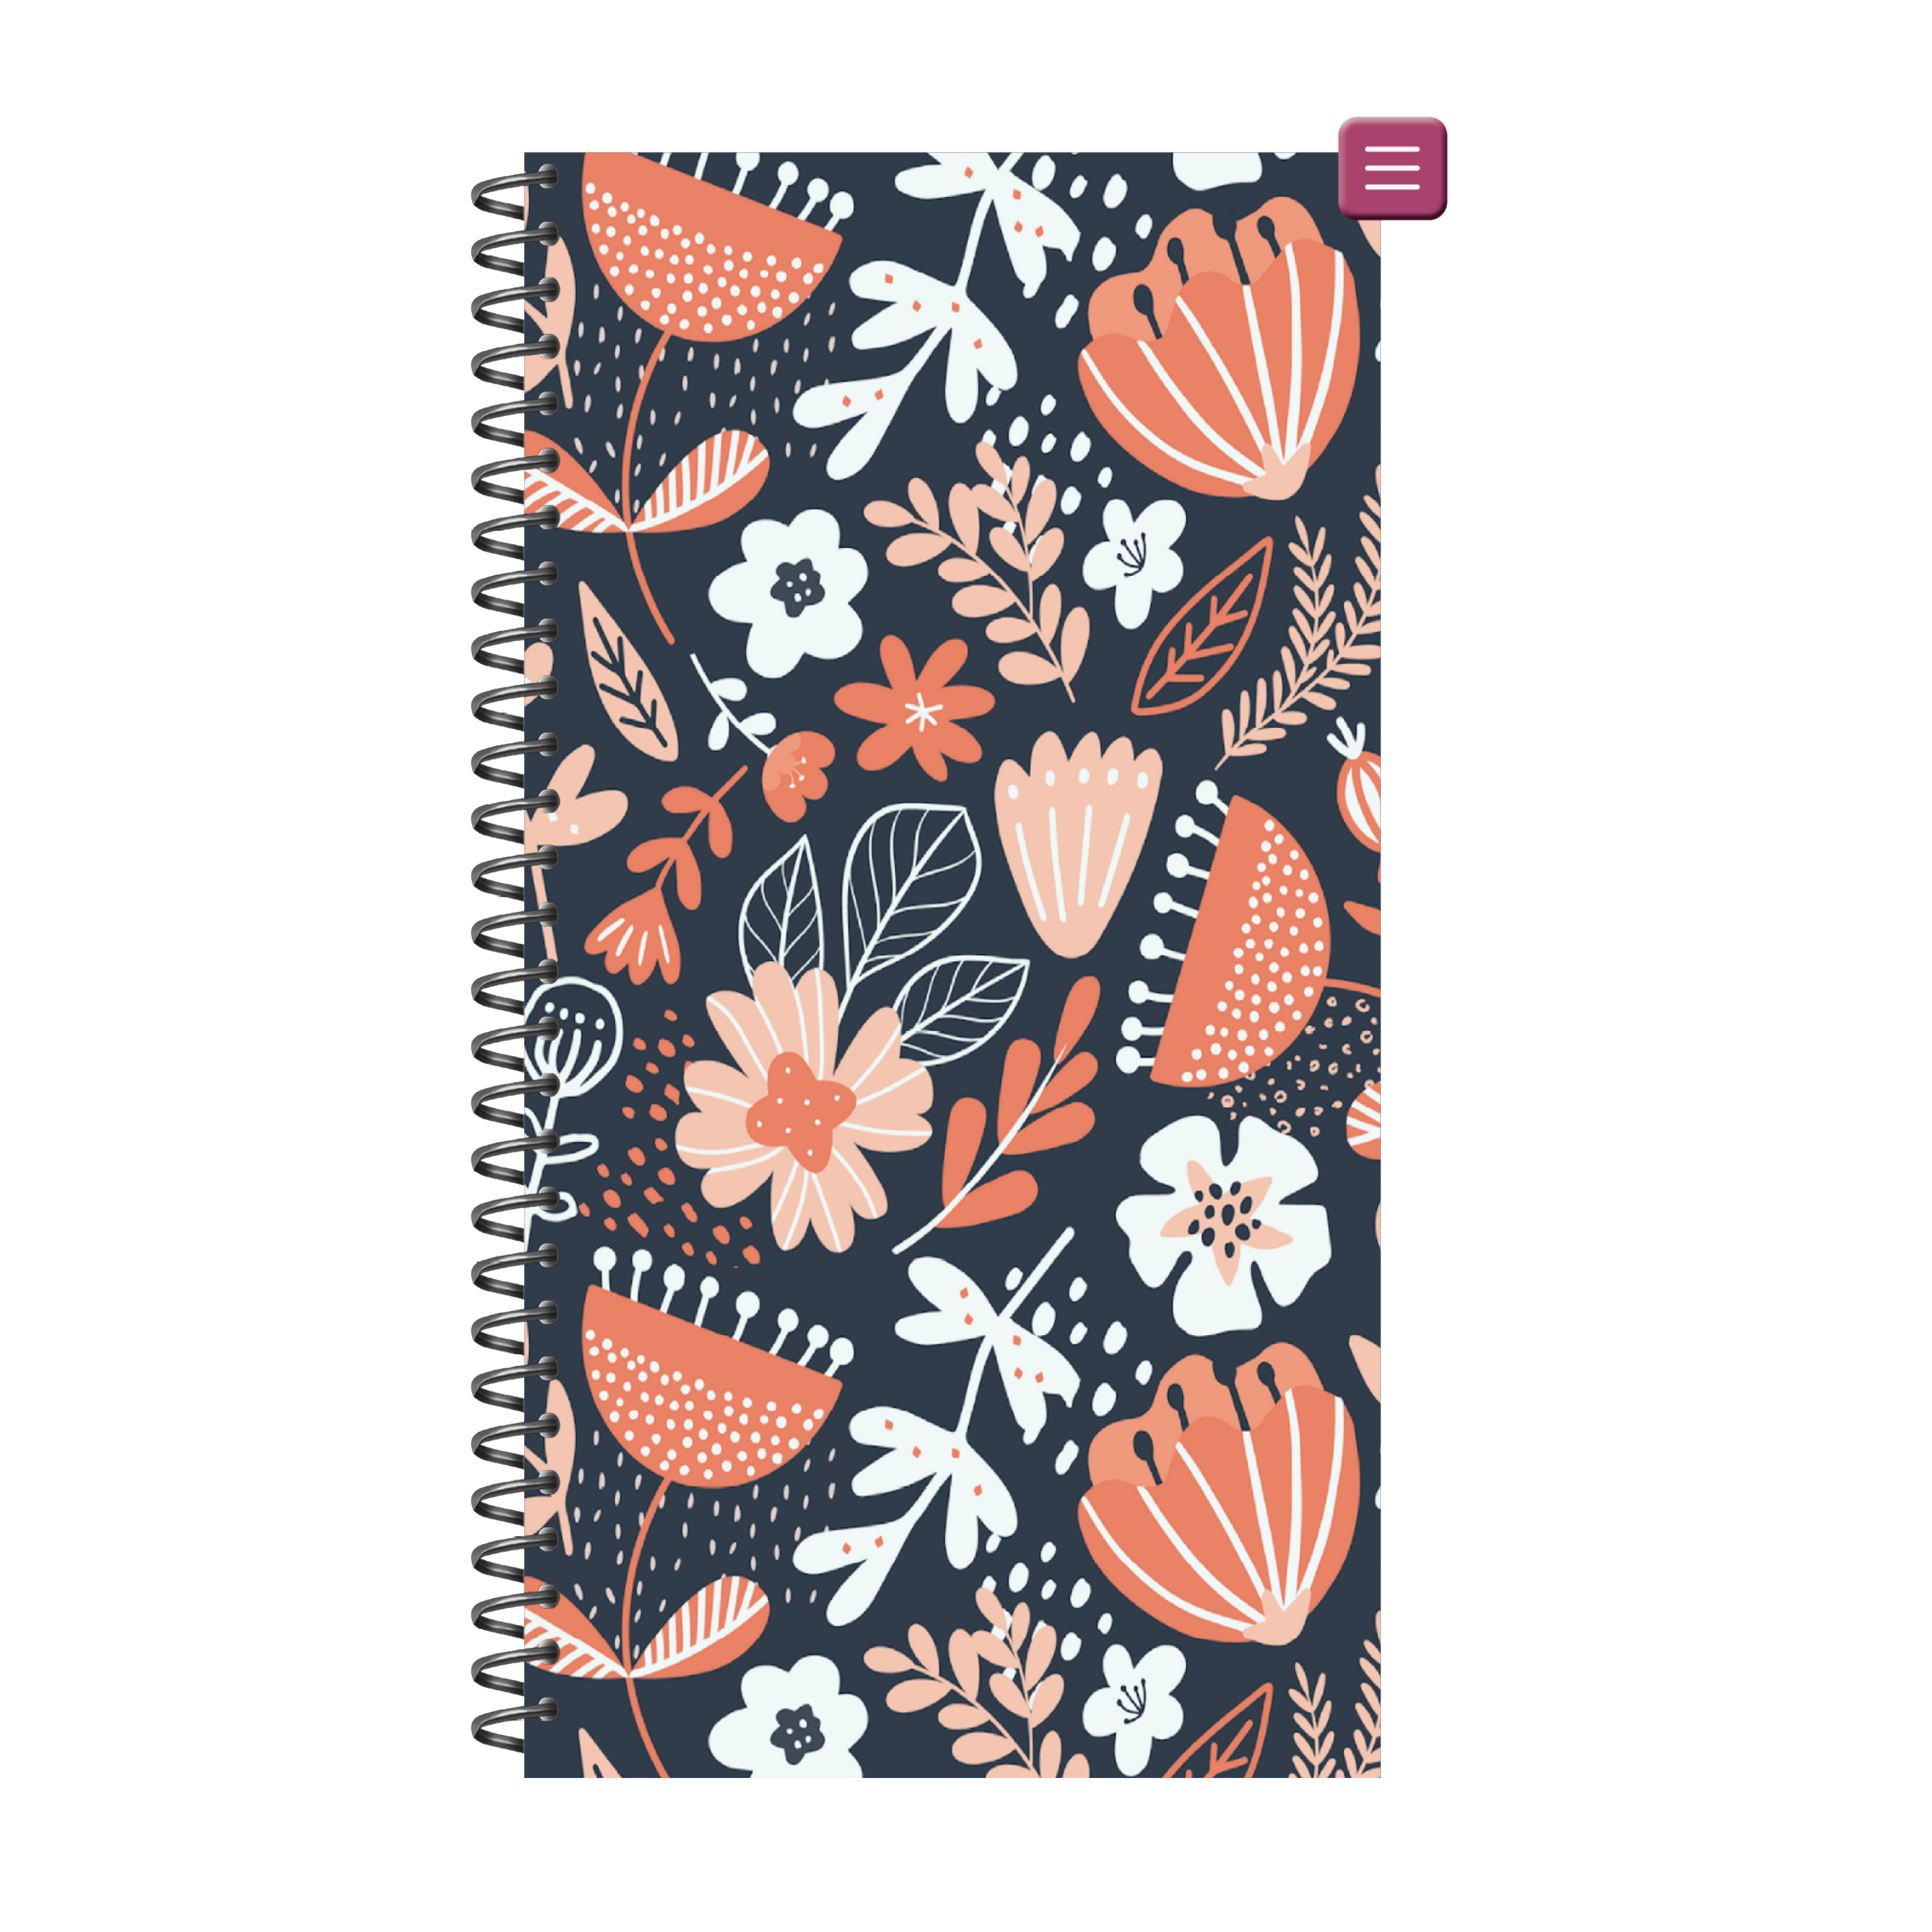 PhoneLife Interchangeable Digital Planner Cover | MIDNIGHT BOHO BLOSSOMS 1